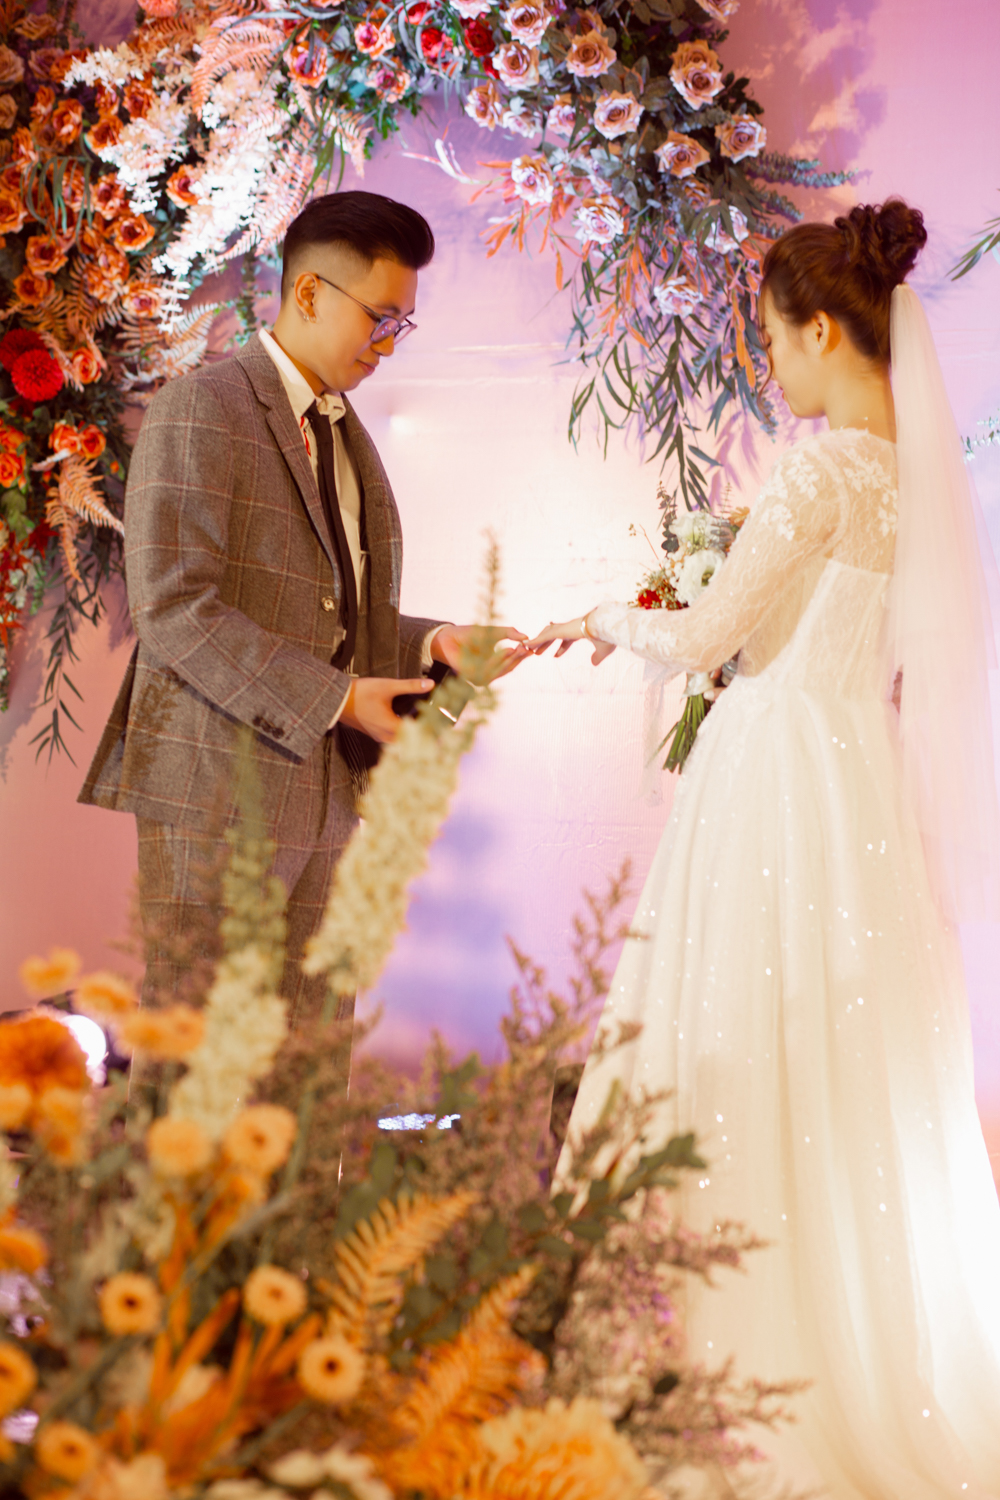 [ CEREMONY PREVIEW ] Vũ Linh & Thục Anh